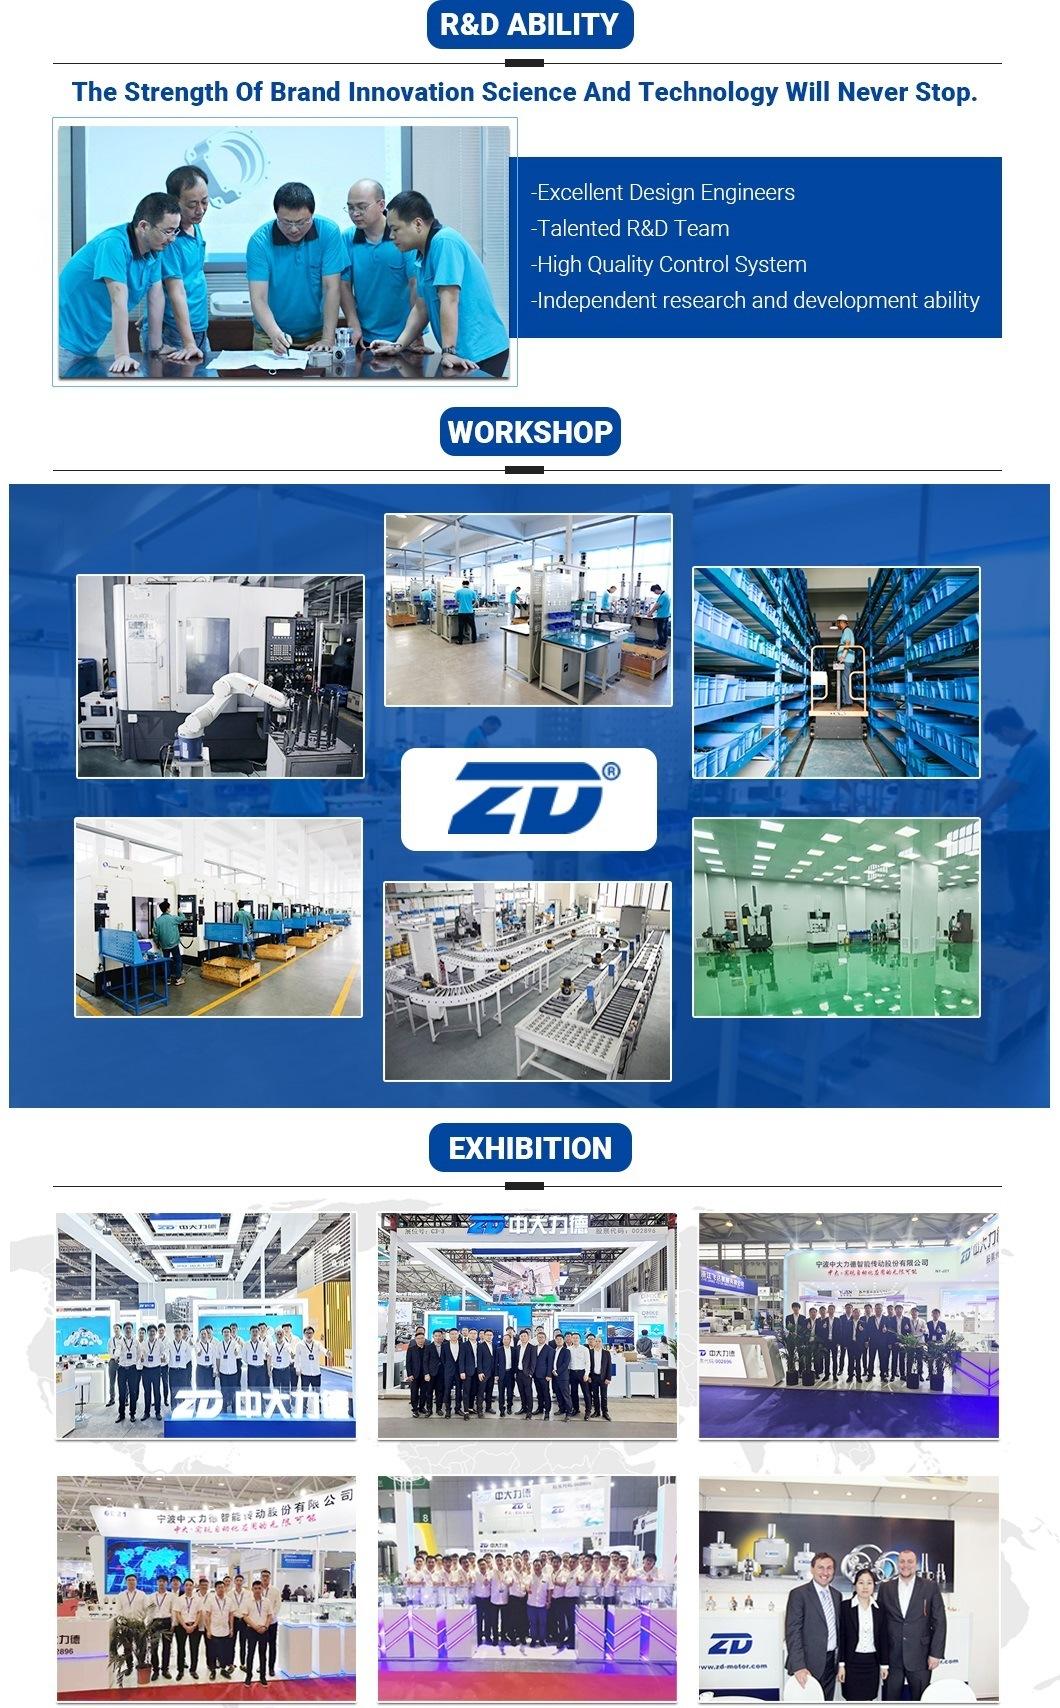 ZD 2.035 - 182.385m/min Linear Velocity Electric Motor Roller Drum for Belt Conveyor Rollers And Sorters